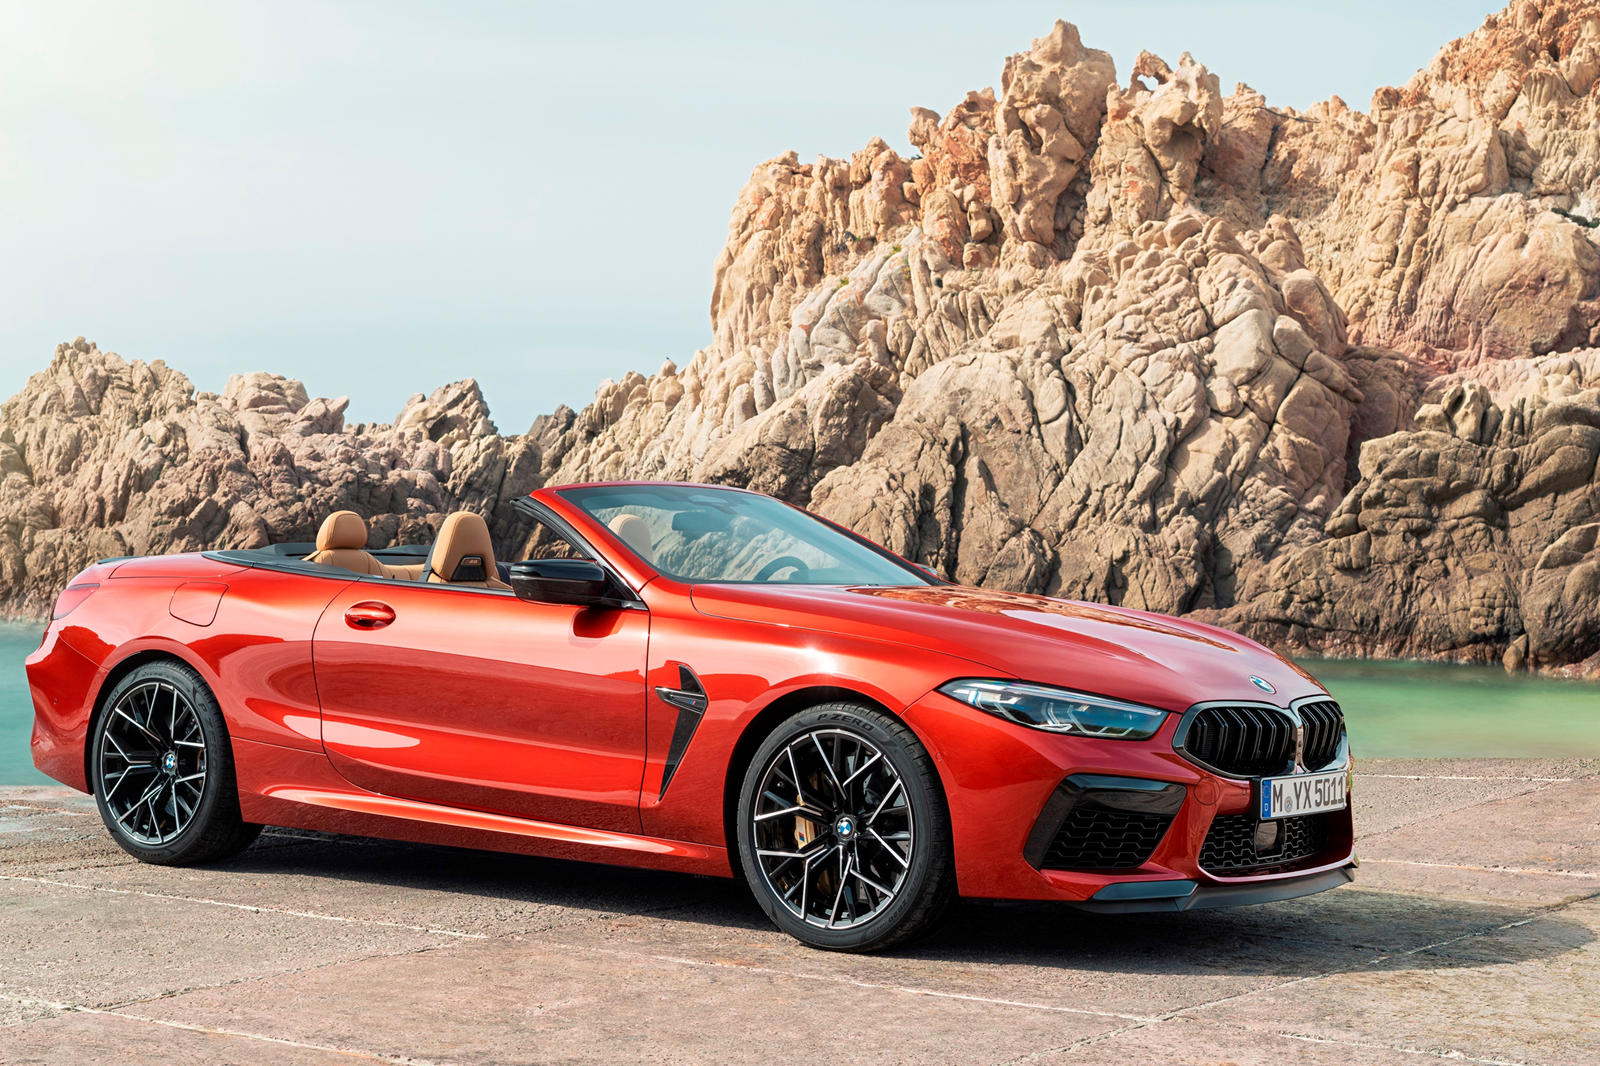 2020 Bmw M8 Convertible Review Trims Specs Price New Interior Features Exterior Design And Specifications Carbuzz